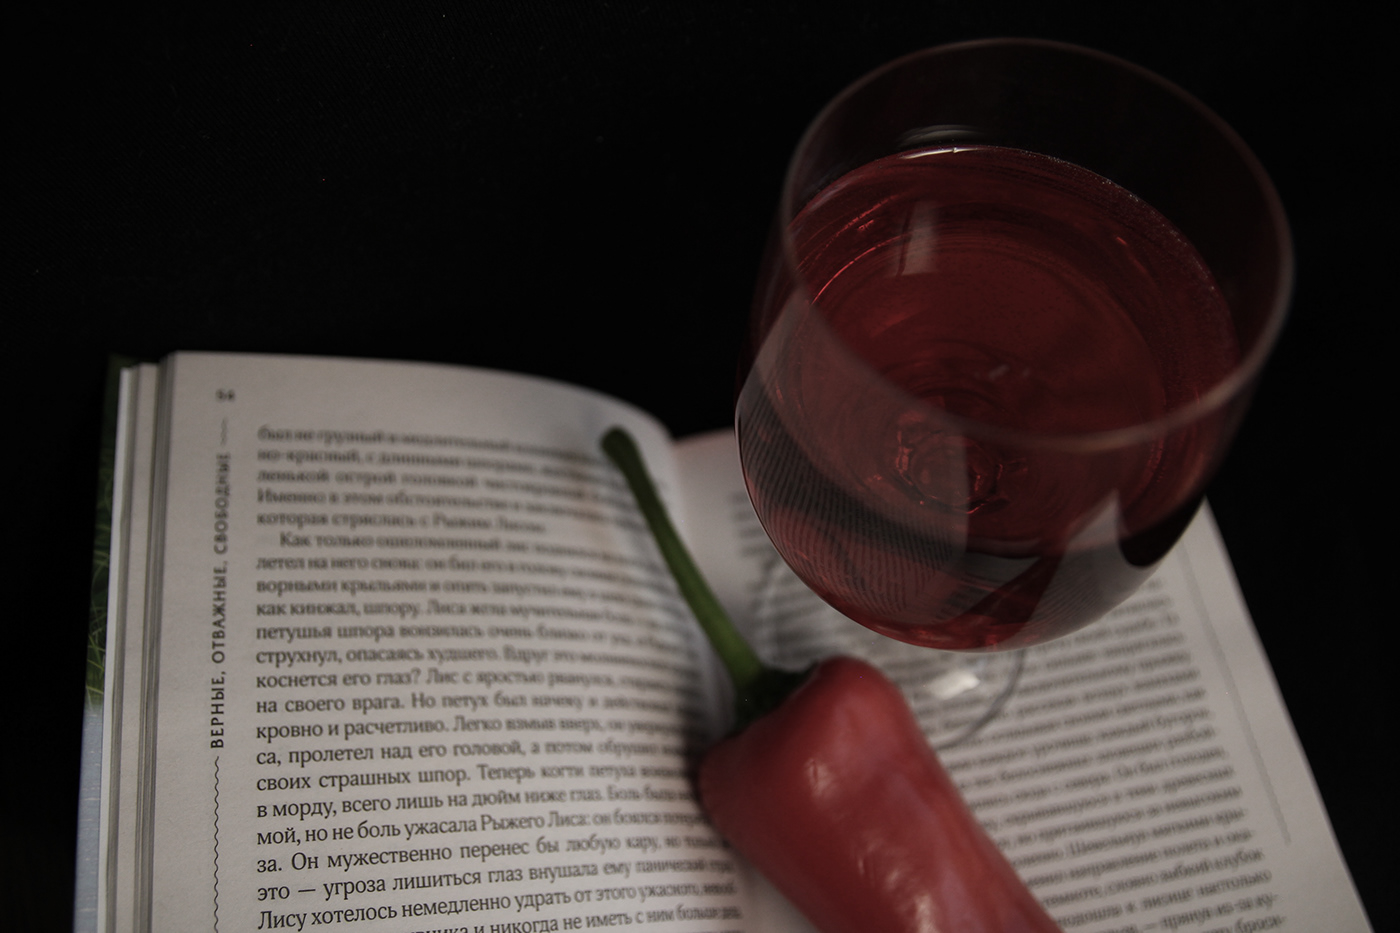 Chili Pepper Reading book wine monochrome background wallpaper Photography  still life photography resting